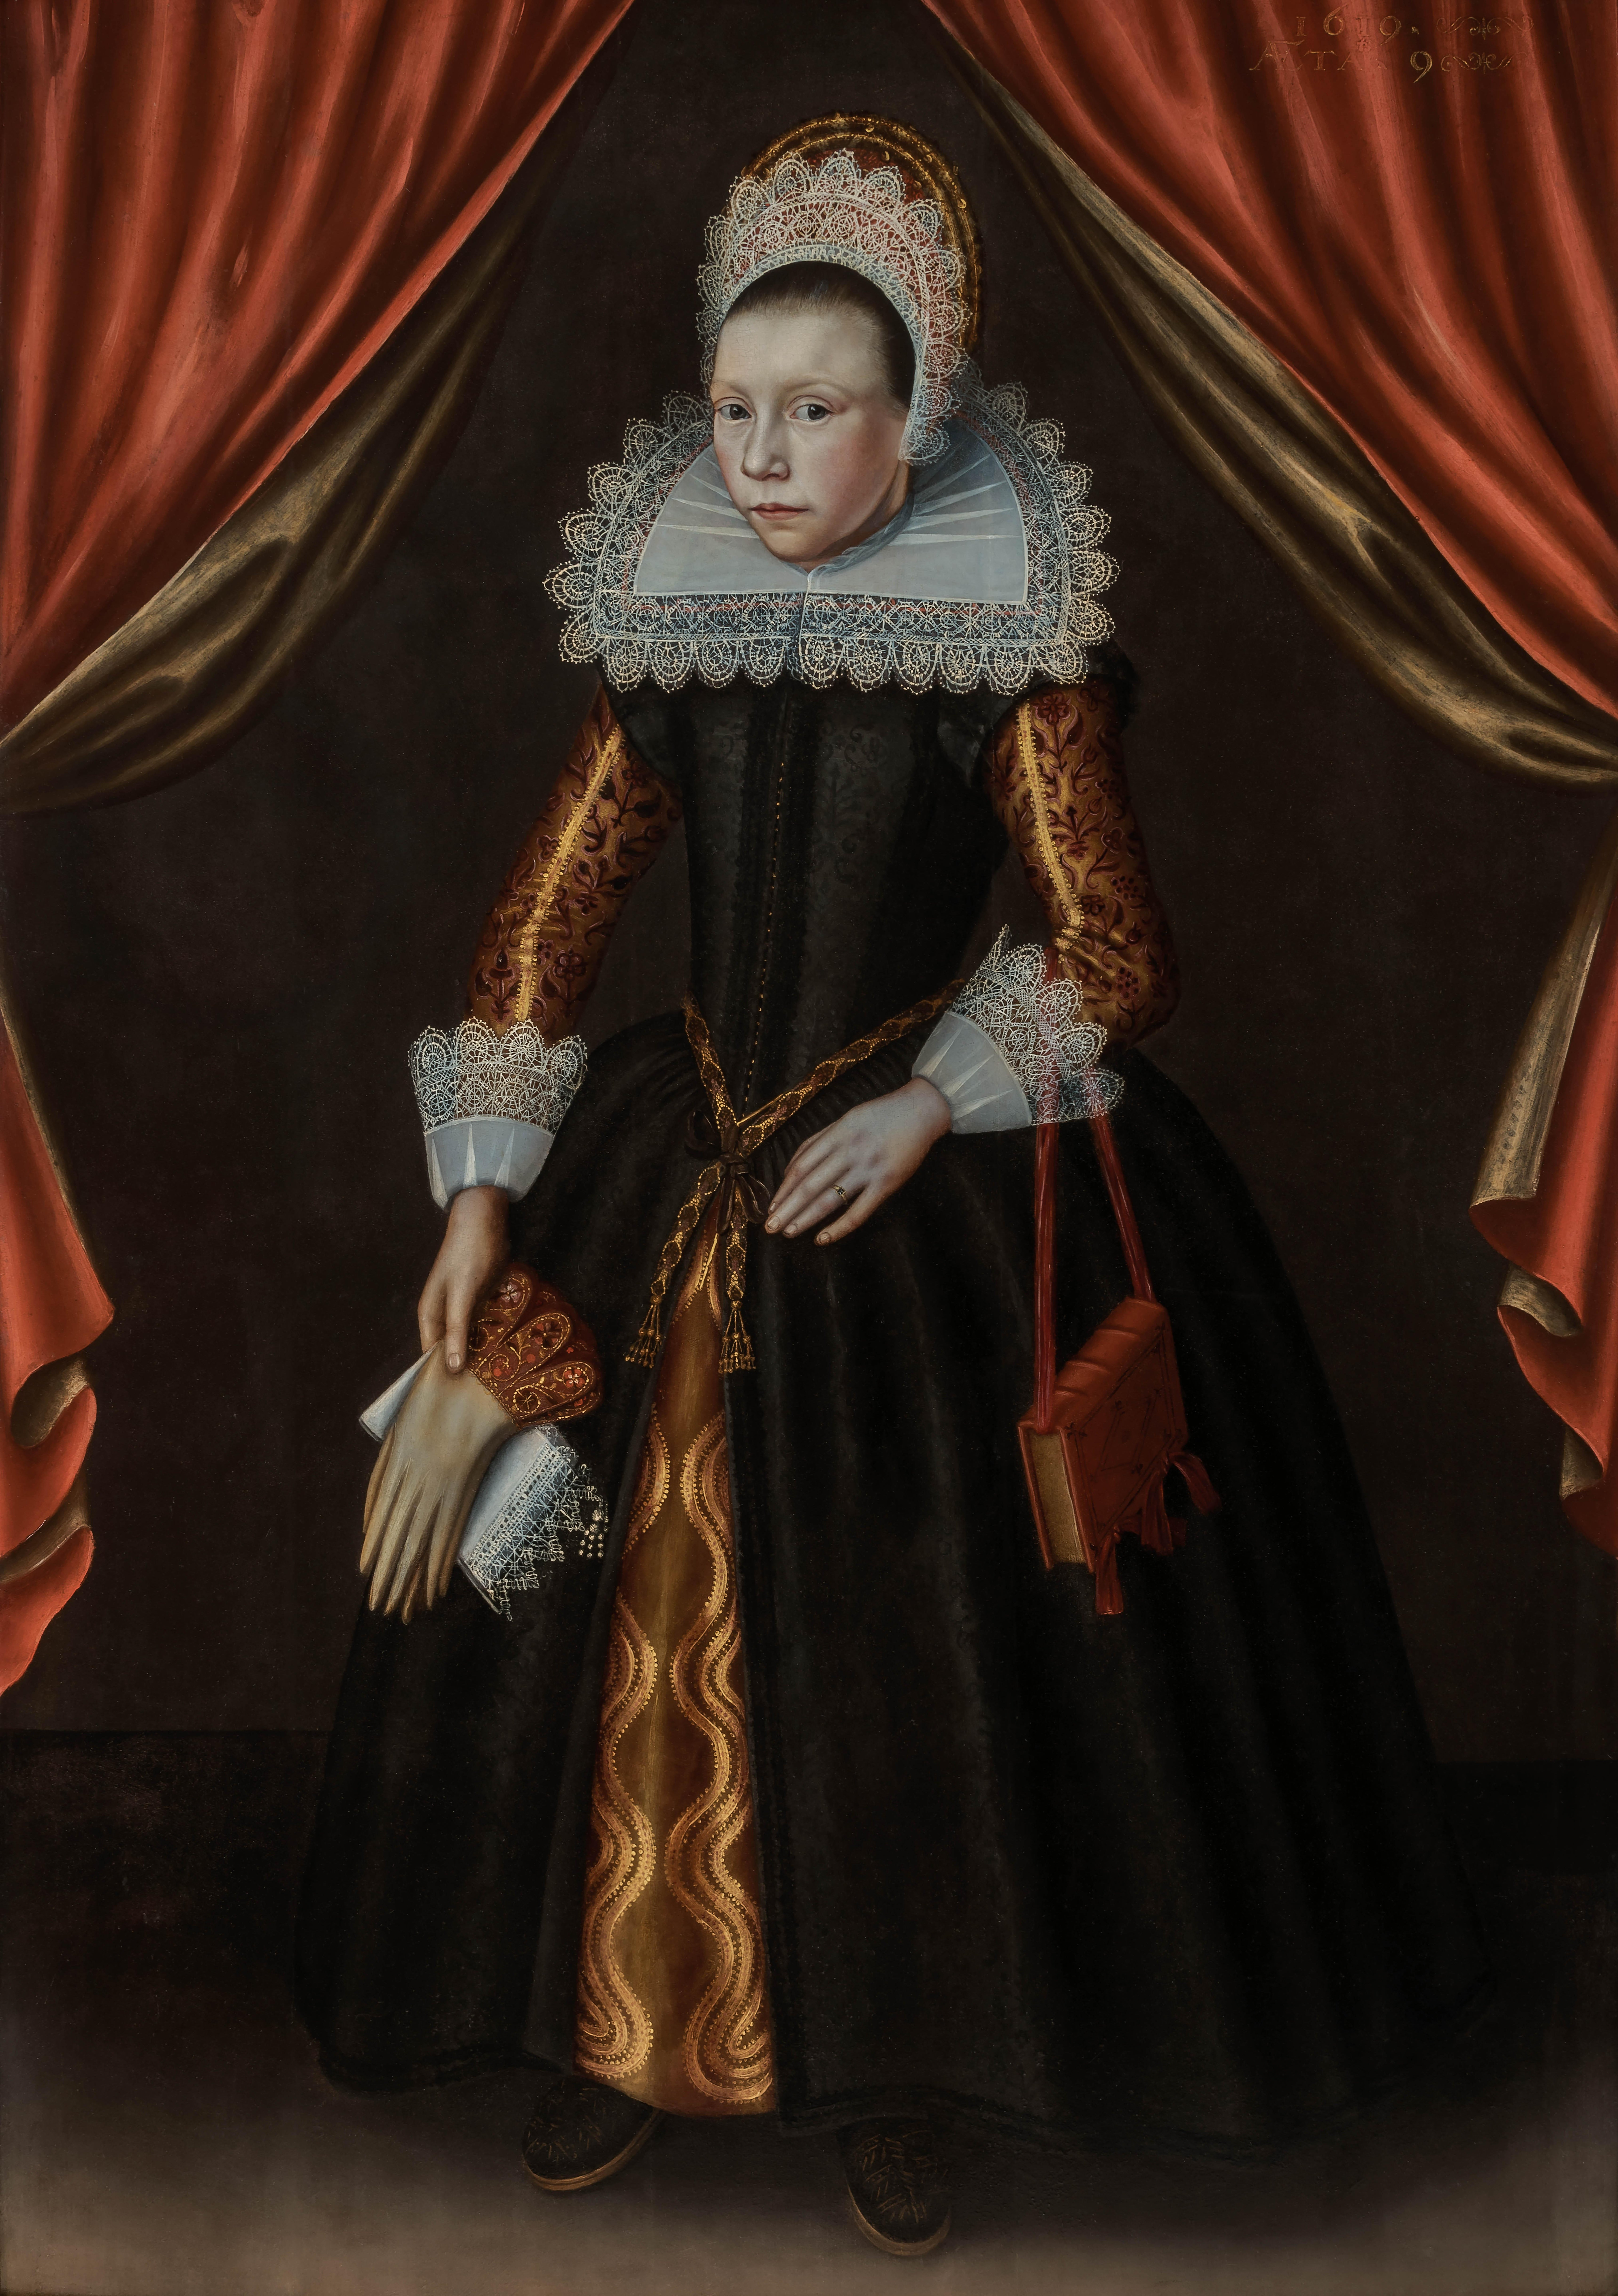 Dutch Old Master Portrait of Girl aged 9 in Black Dress & Lace Ruff dated 1619 - Old Masters Painting by Cornelius van der Voort